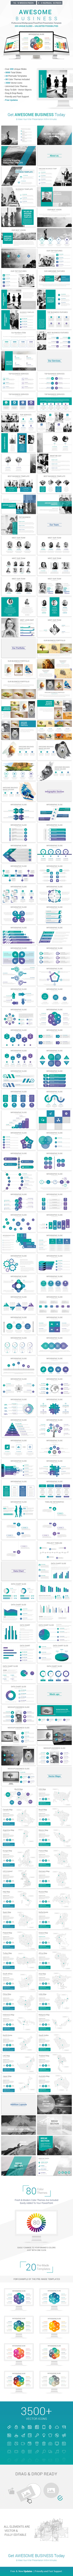 Awesome Business PowerPoint Presentation Template